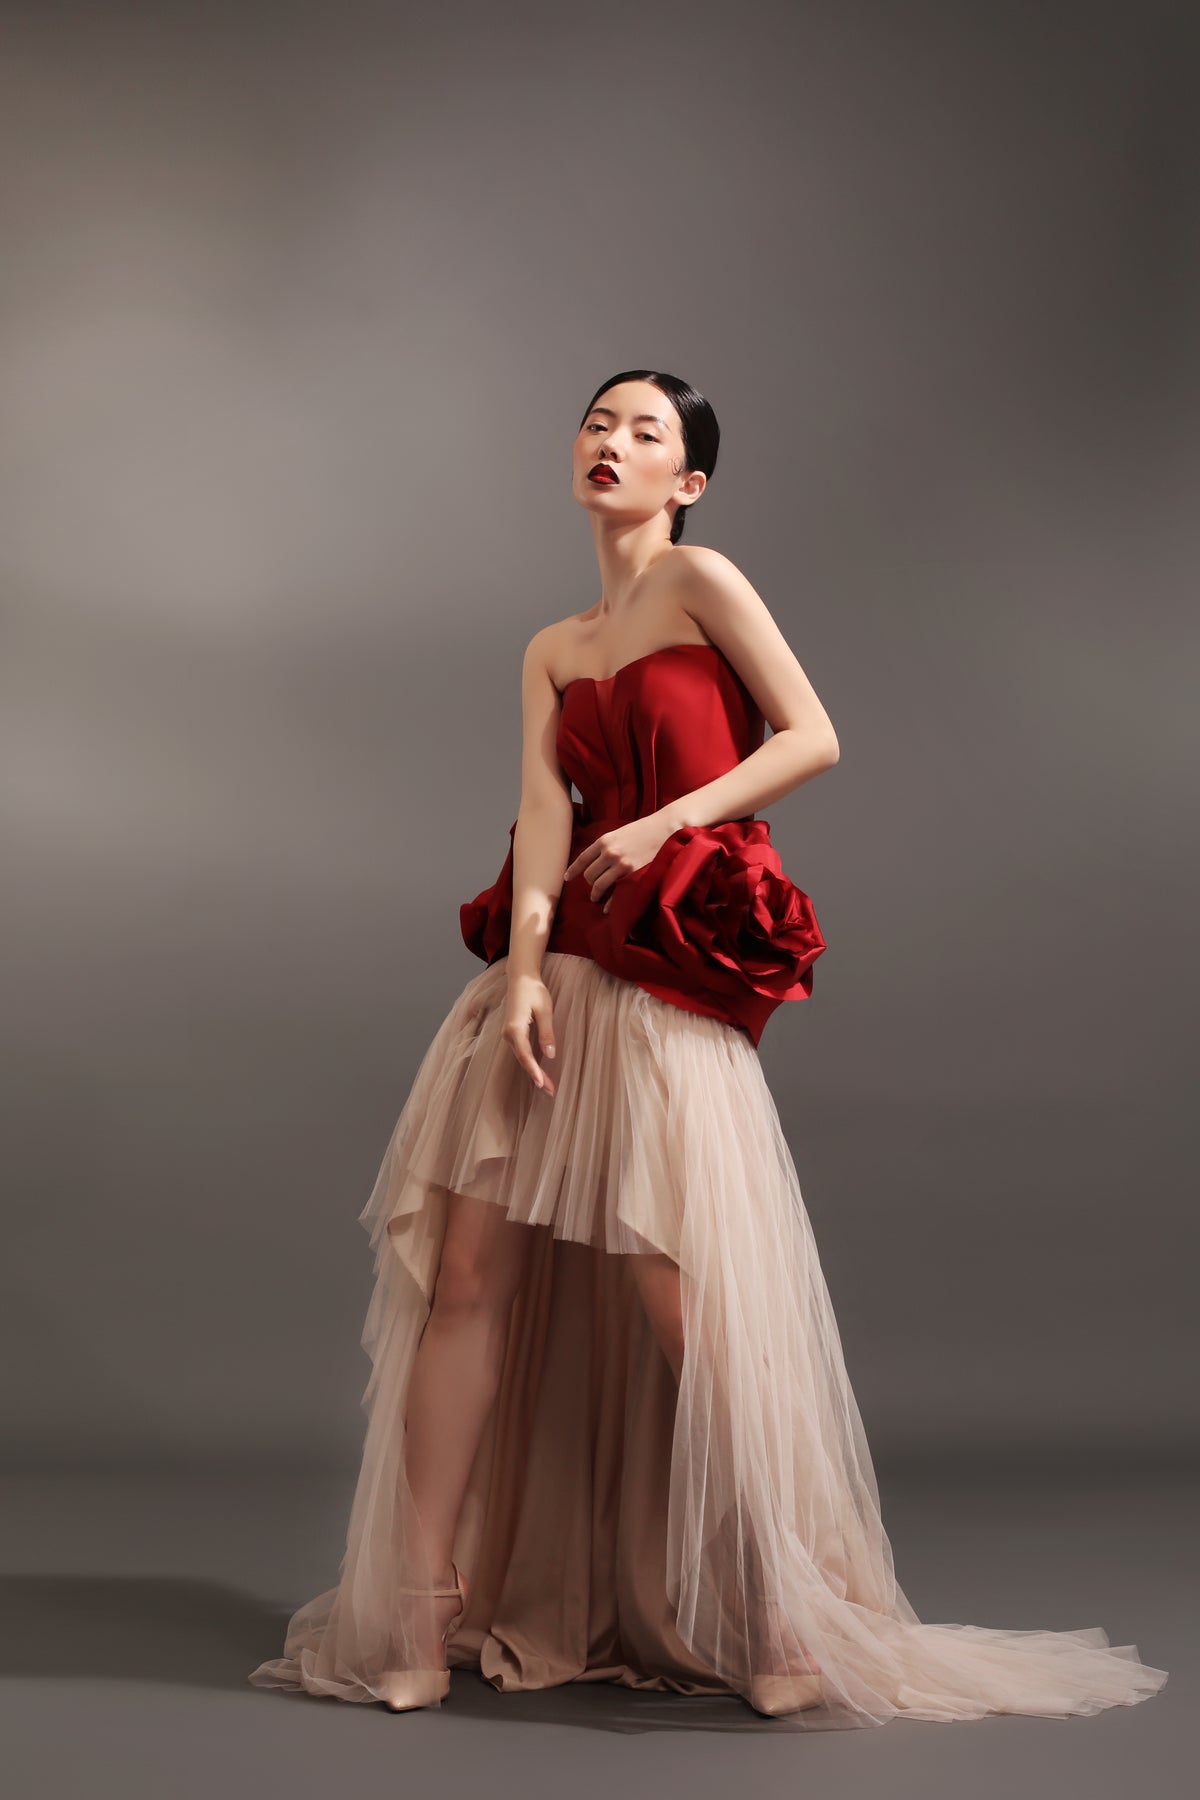 Red dress in deep v-neck cut with petals draping on hips with micro-pleated mullet skirt